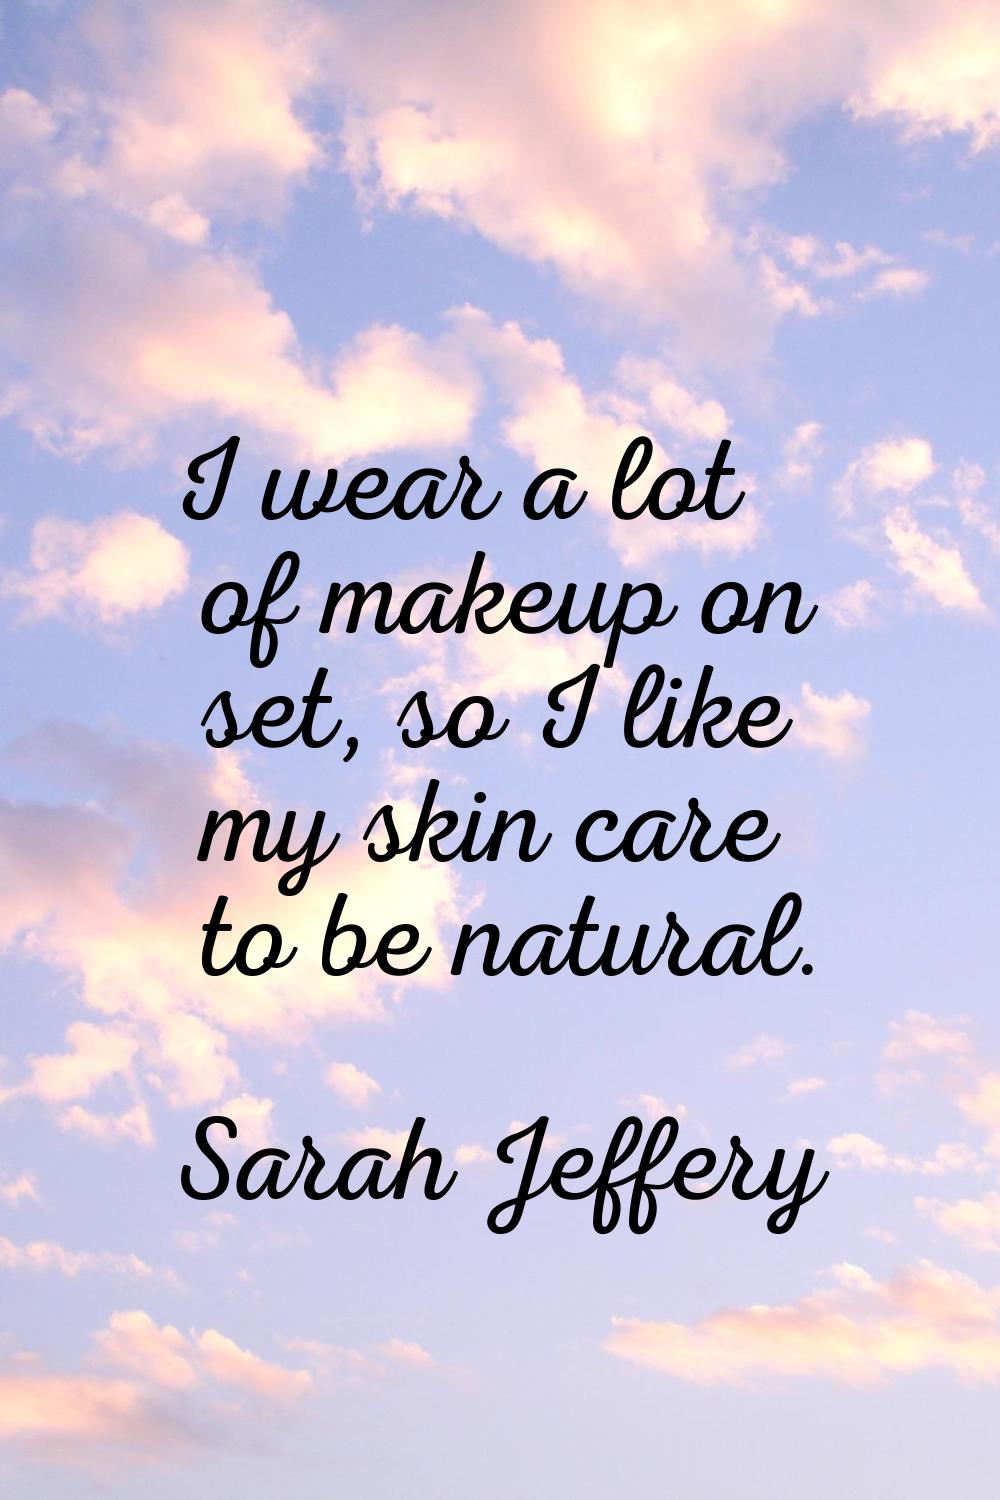 I wear a lot of makeup on set, so I like my skin care to be natural.